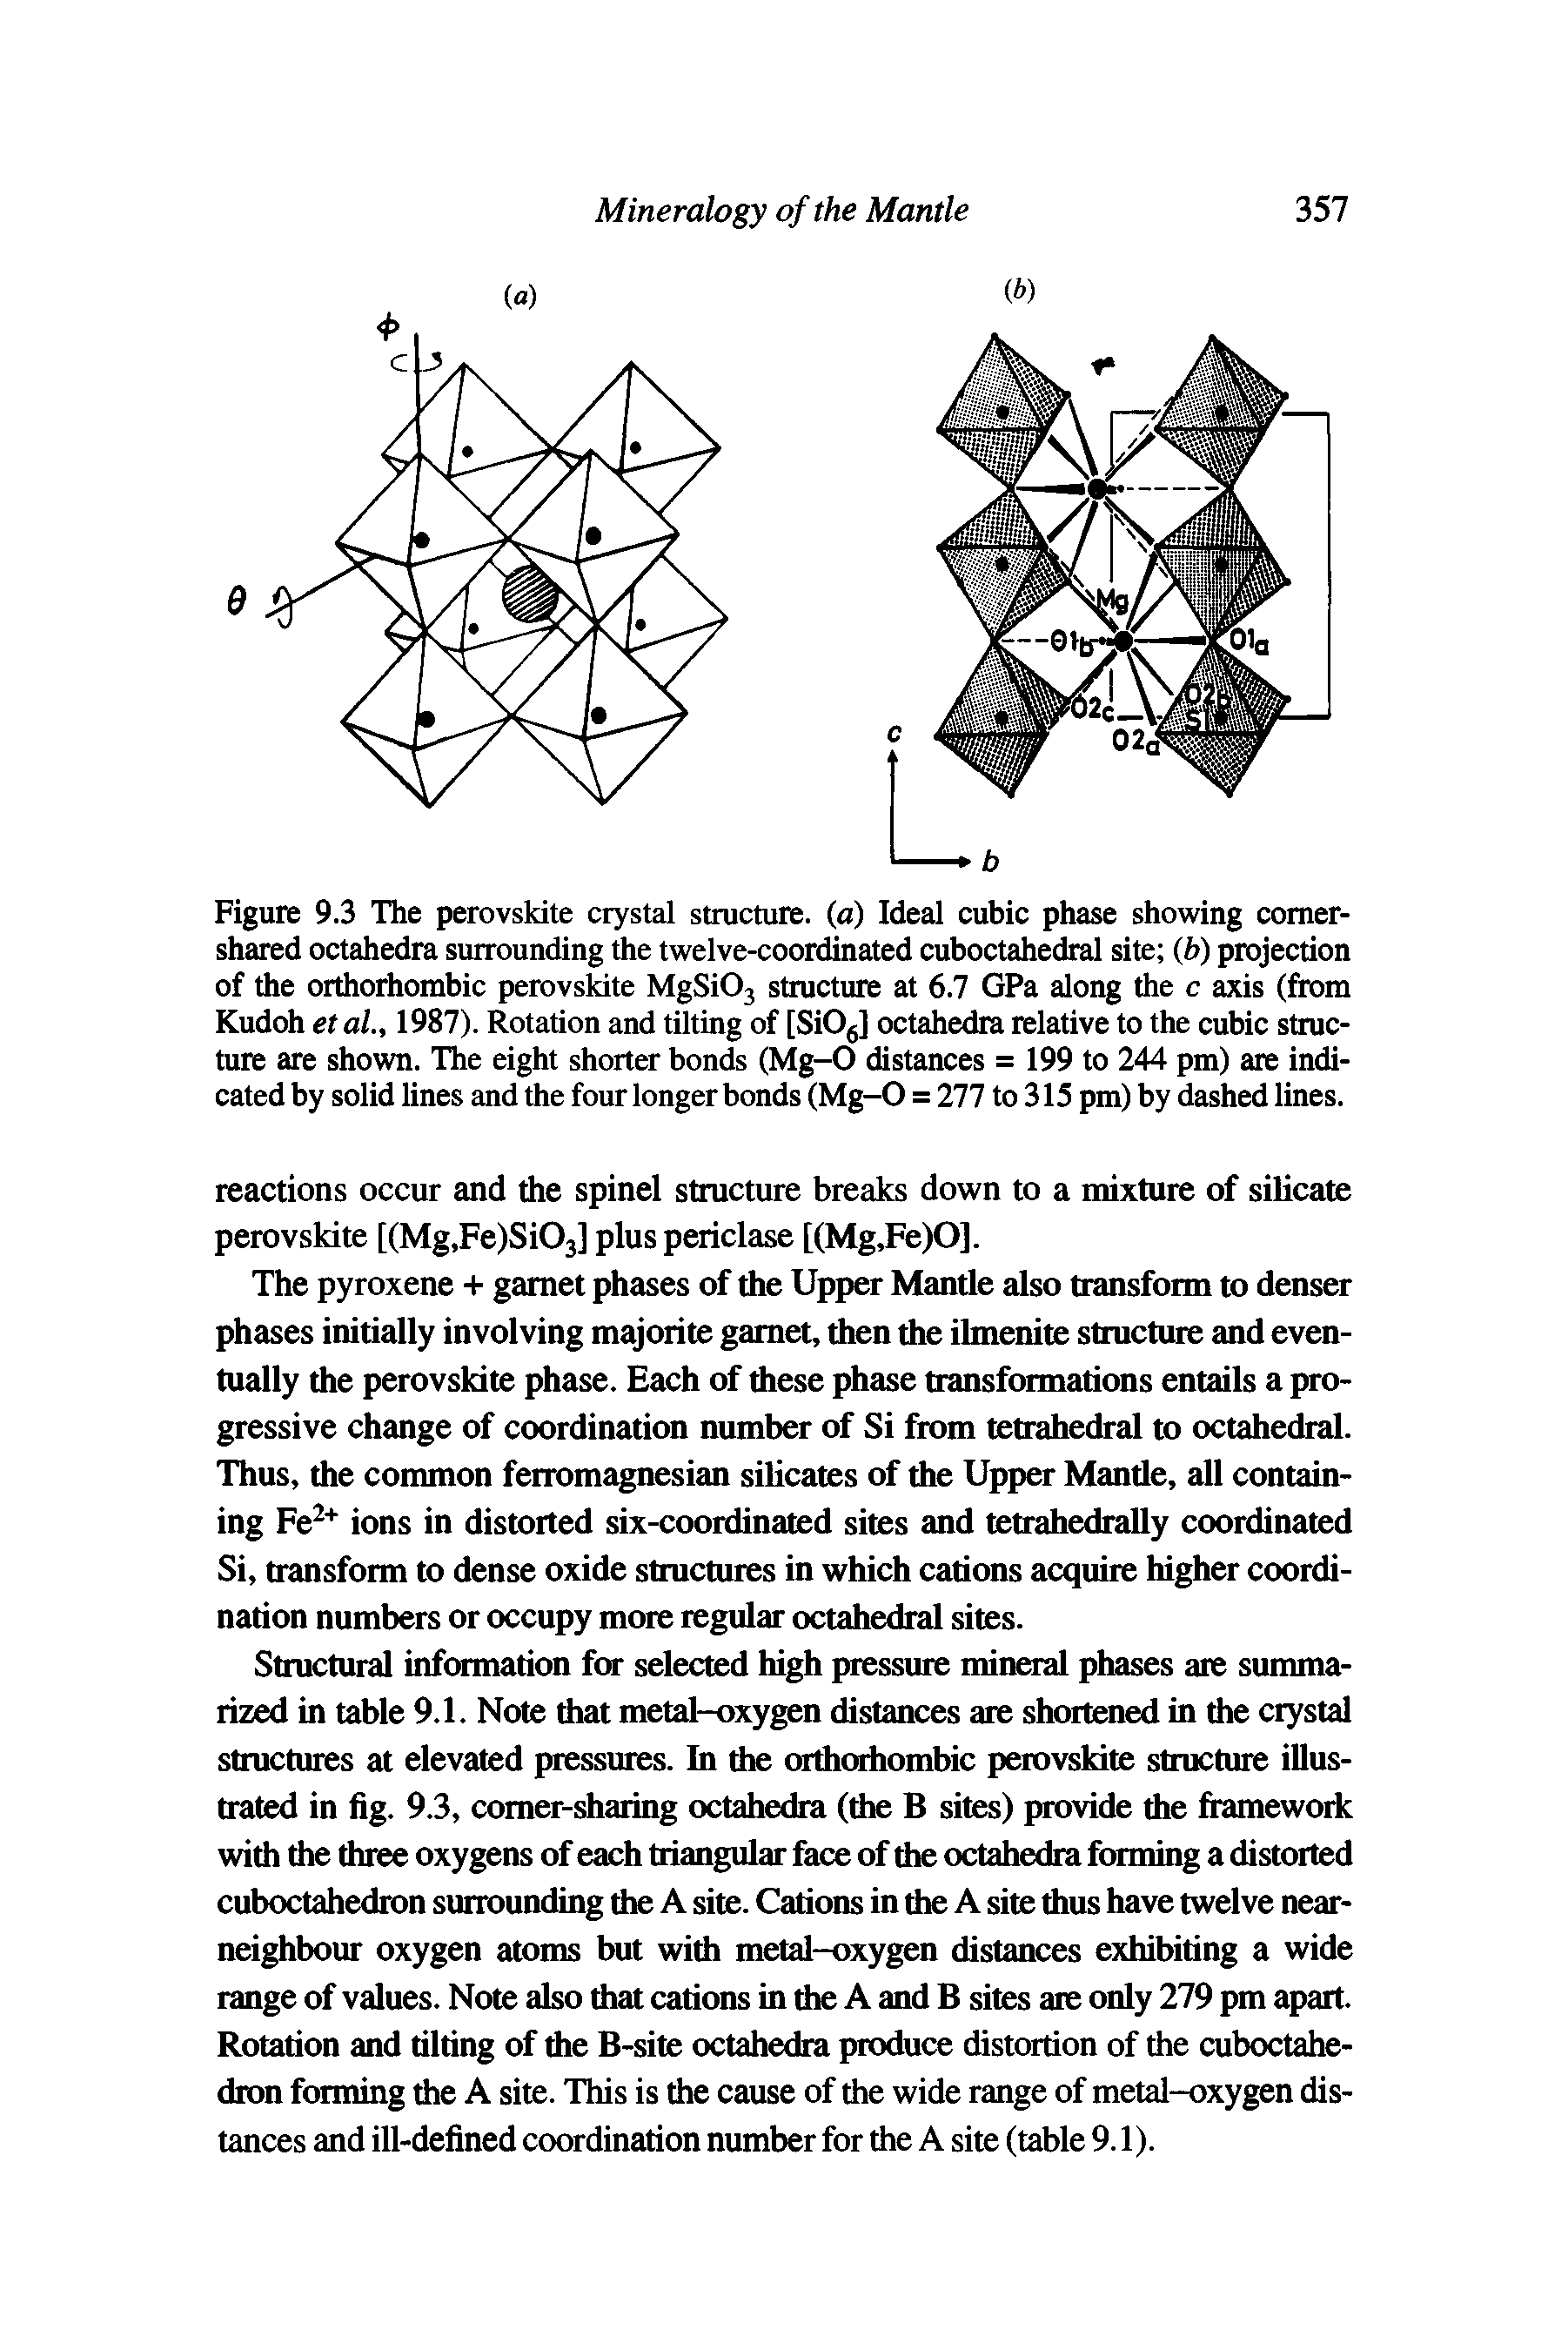 Figure 9.3 The perovskite crystal structure, (a) Ideal cubic phase showing comer-shared octahedra surrounding the twelve-coordinated cuboctahedral site (b) projection of the orthorhombic perovskite MgSi03 structure at 6.7 GPa along the c axis (from Kudoh etal., 1987). Rotation and tilting of [Si06] octahedra relative to the cubic structure are shown. The eight shorter bonds (Mg-0 distances = 199 to 244 pm) are indicated by solid lines and the four longer bonds (Mg-0 = 277 to 315 pm) by dashed lines.